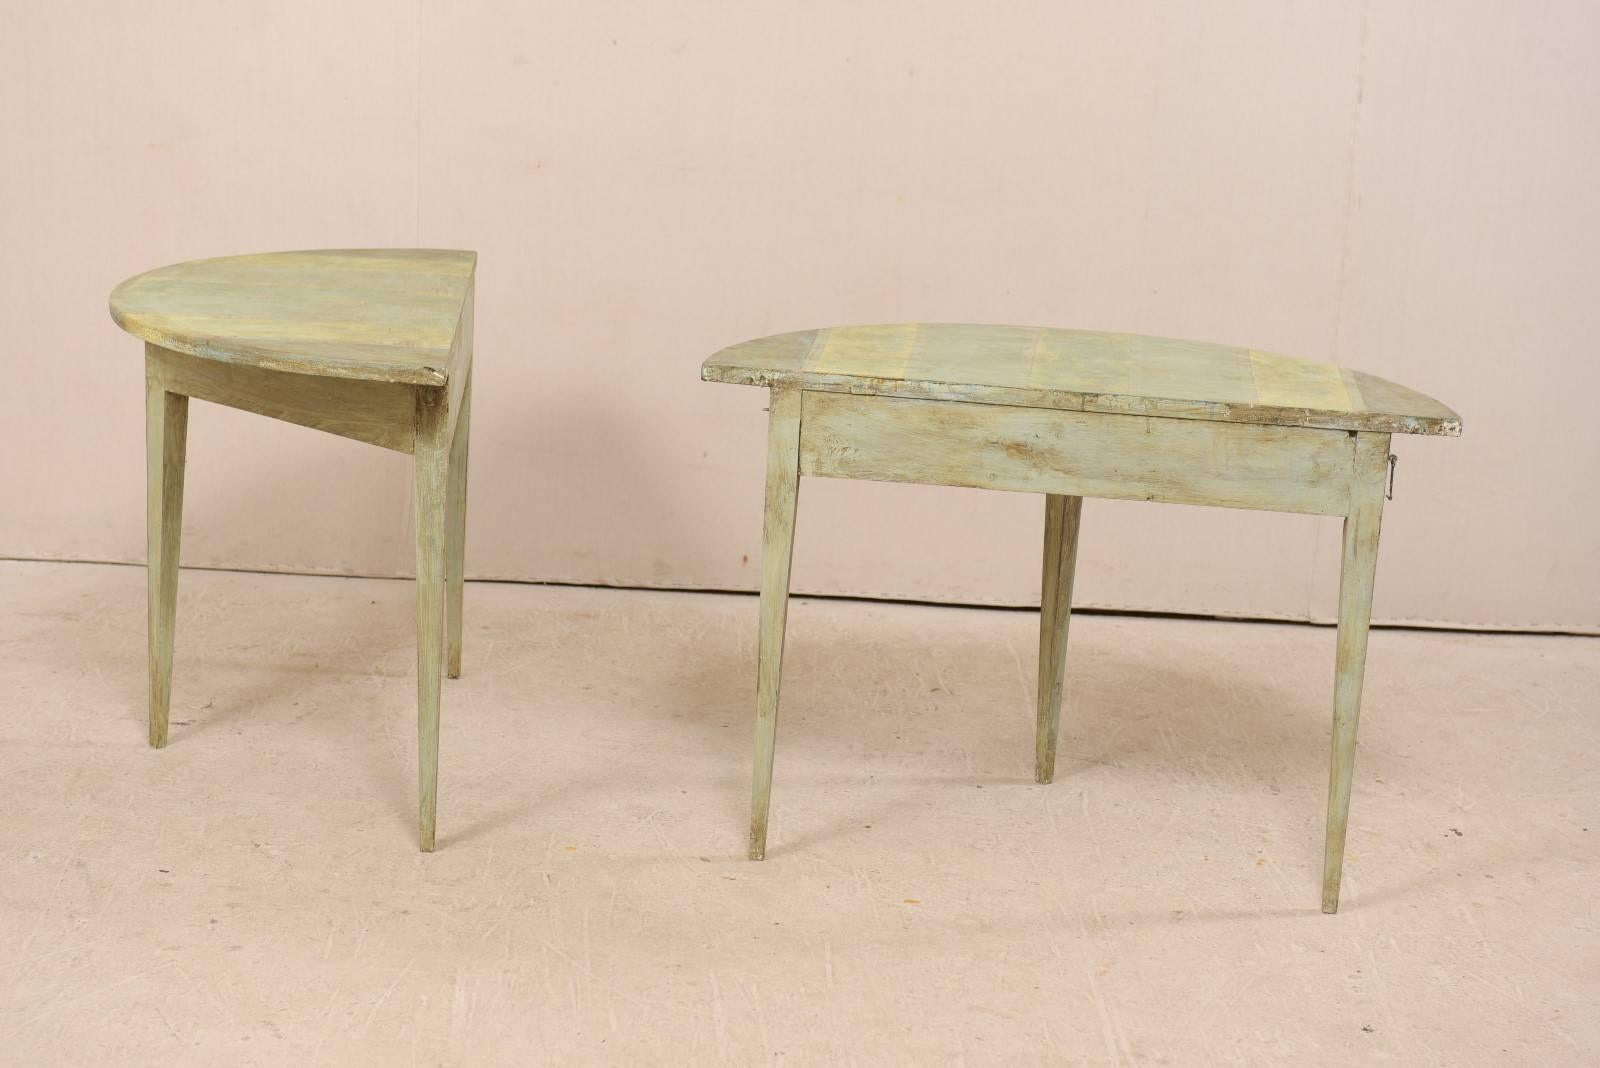 Pair of Swedish 19th Century Painted Wood Demilune Tables 1